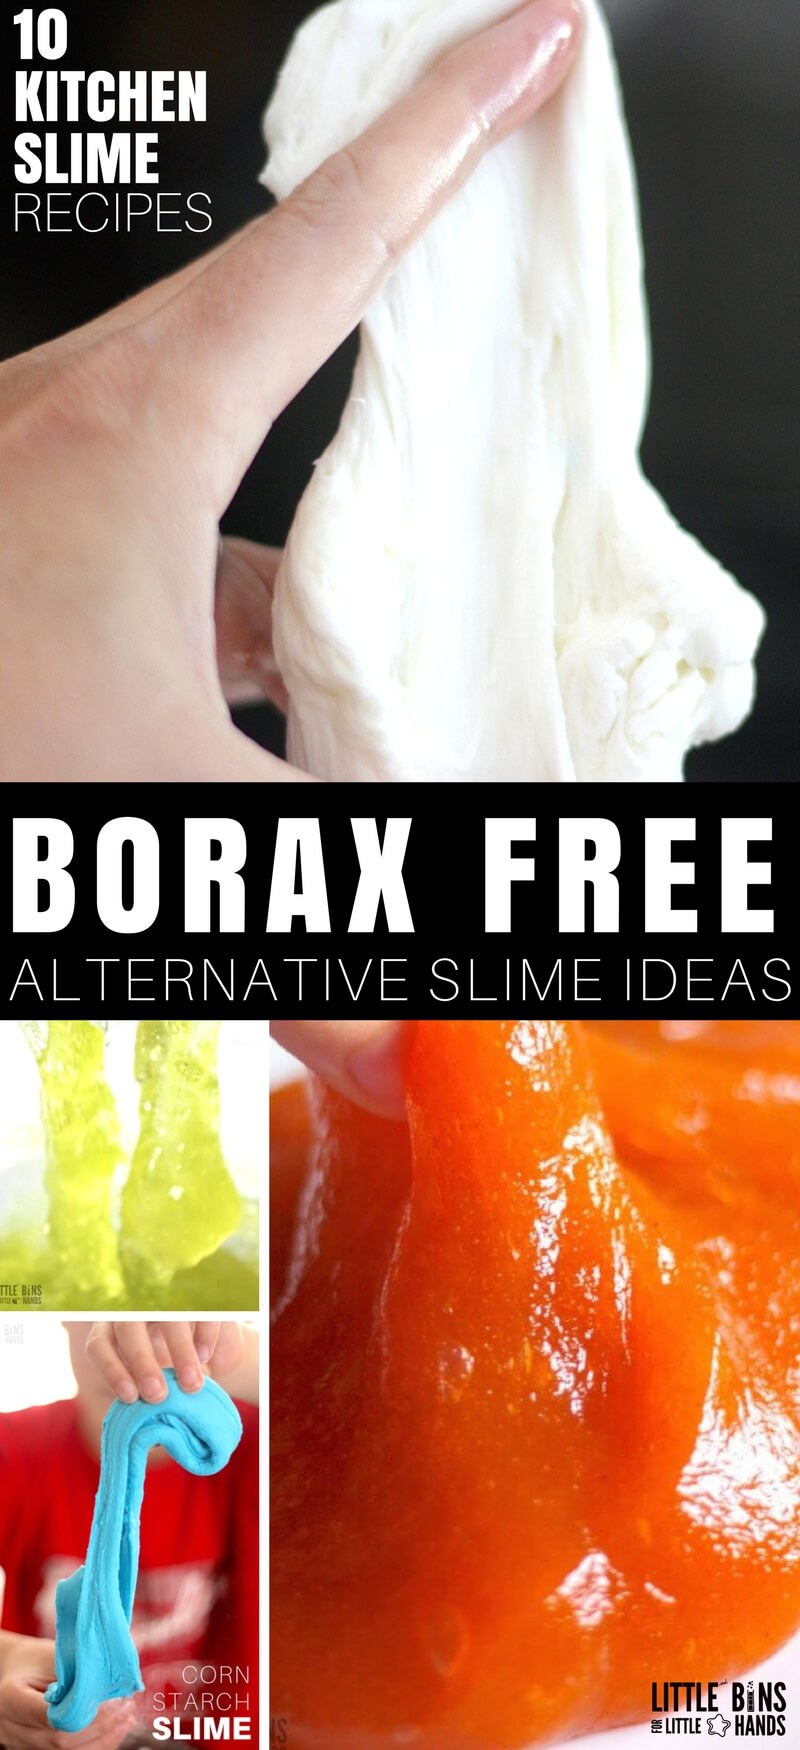 Borax free slime? You bet! Can you still enjoy making homemade slime without using borax, boric acid, or sodium borate? Yes you can! If you are looking for some fun alternative slime making ideas, look no further. We have removed and replaced the classic slime activators with gelatin, fiber, marshmallows, and more to create fun slimy recipes. 